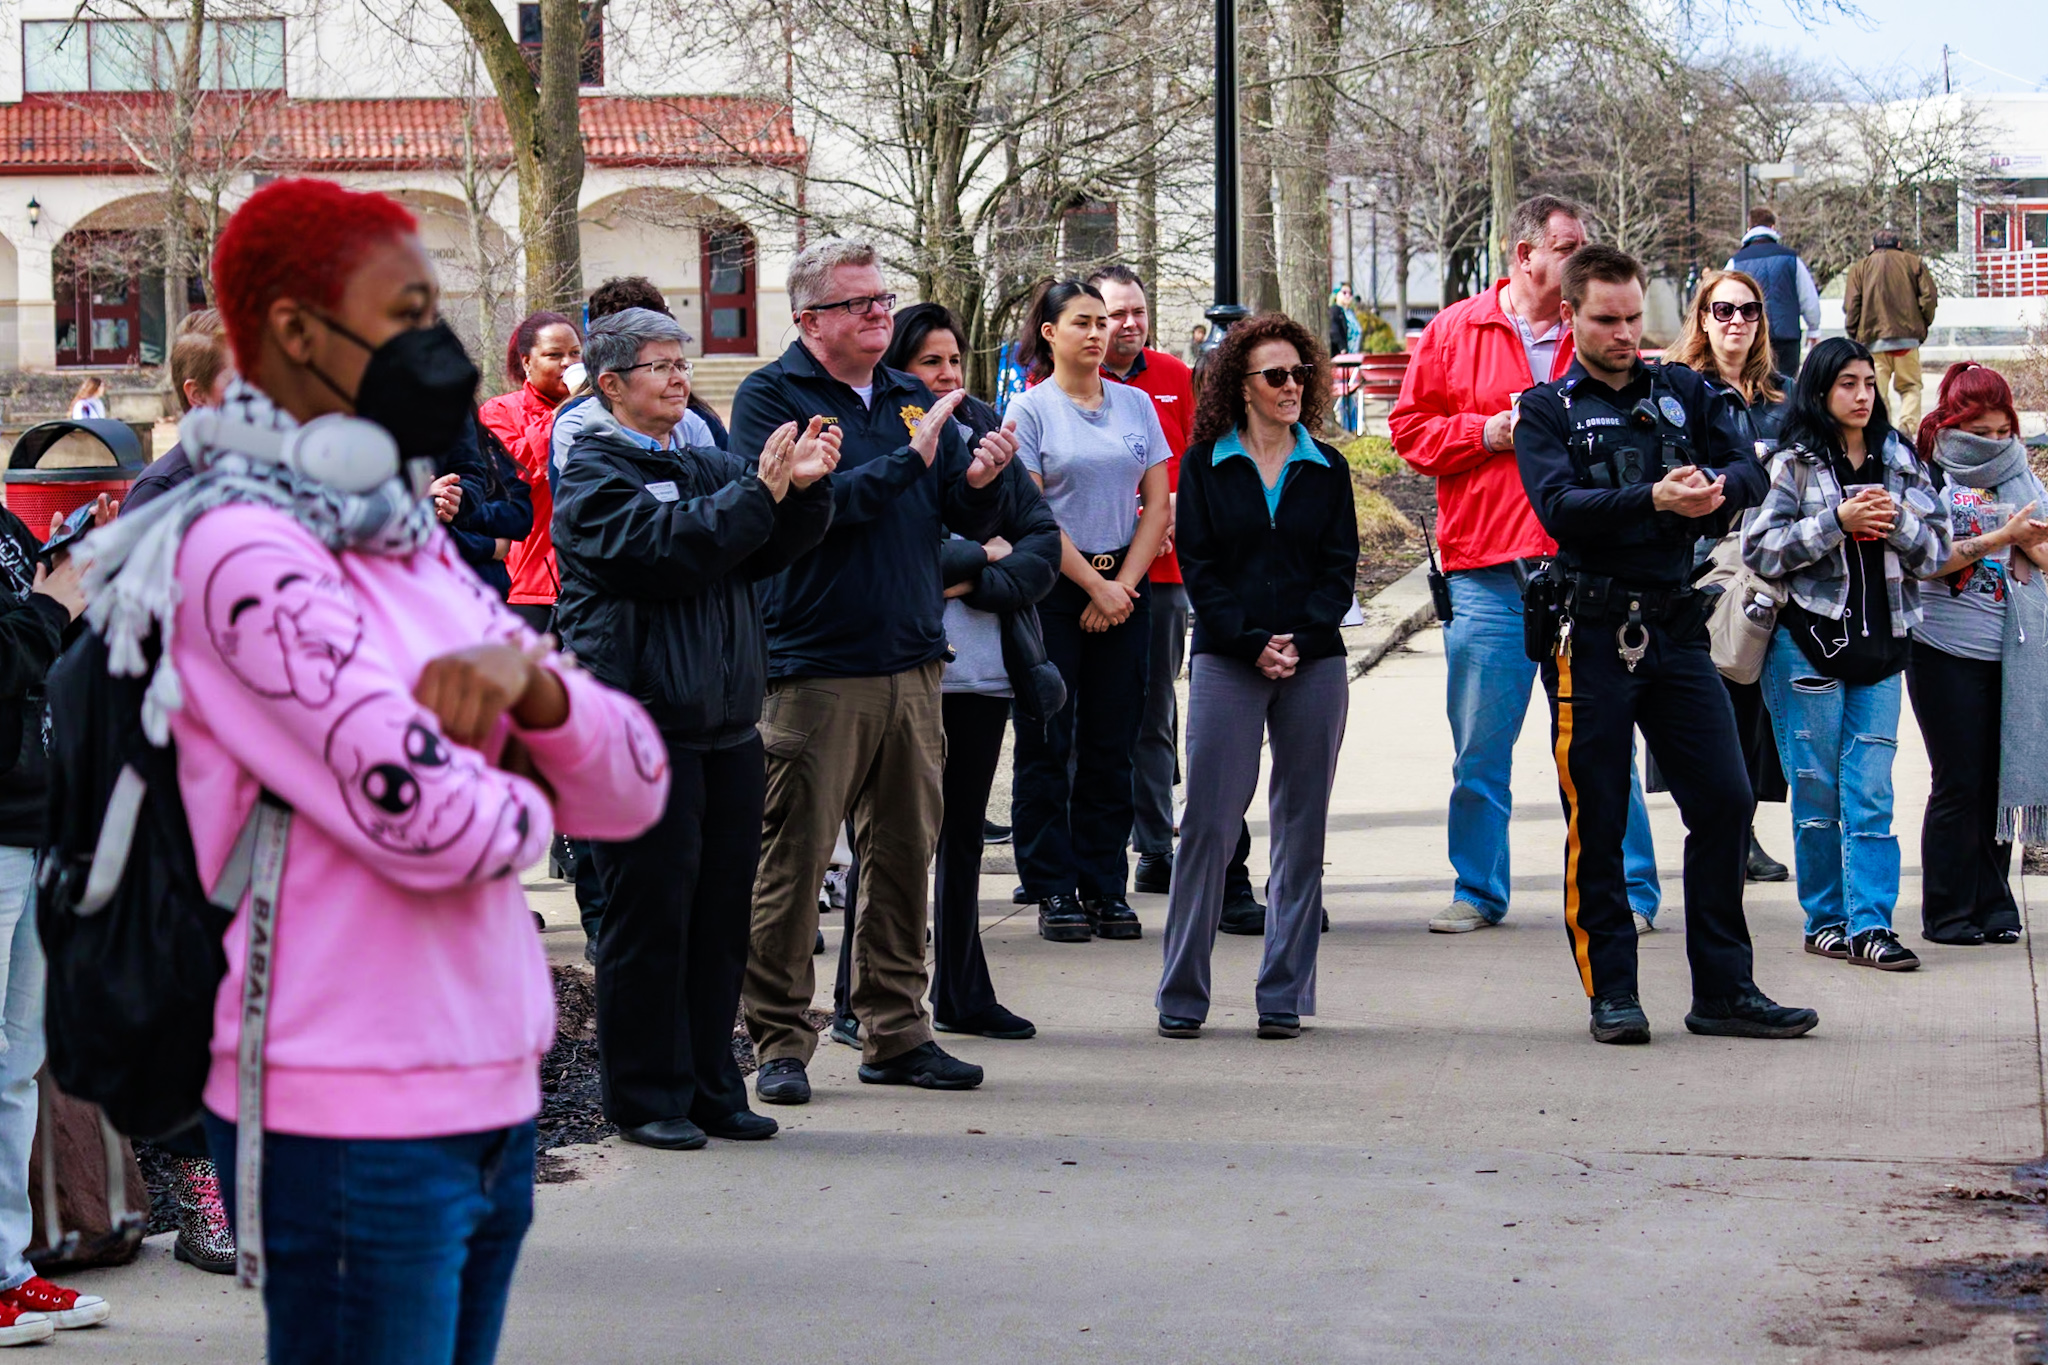 Members of the campus community watch the Women's History Month flag-raising event.
Sal DiMaggio | The Montclarion